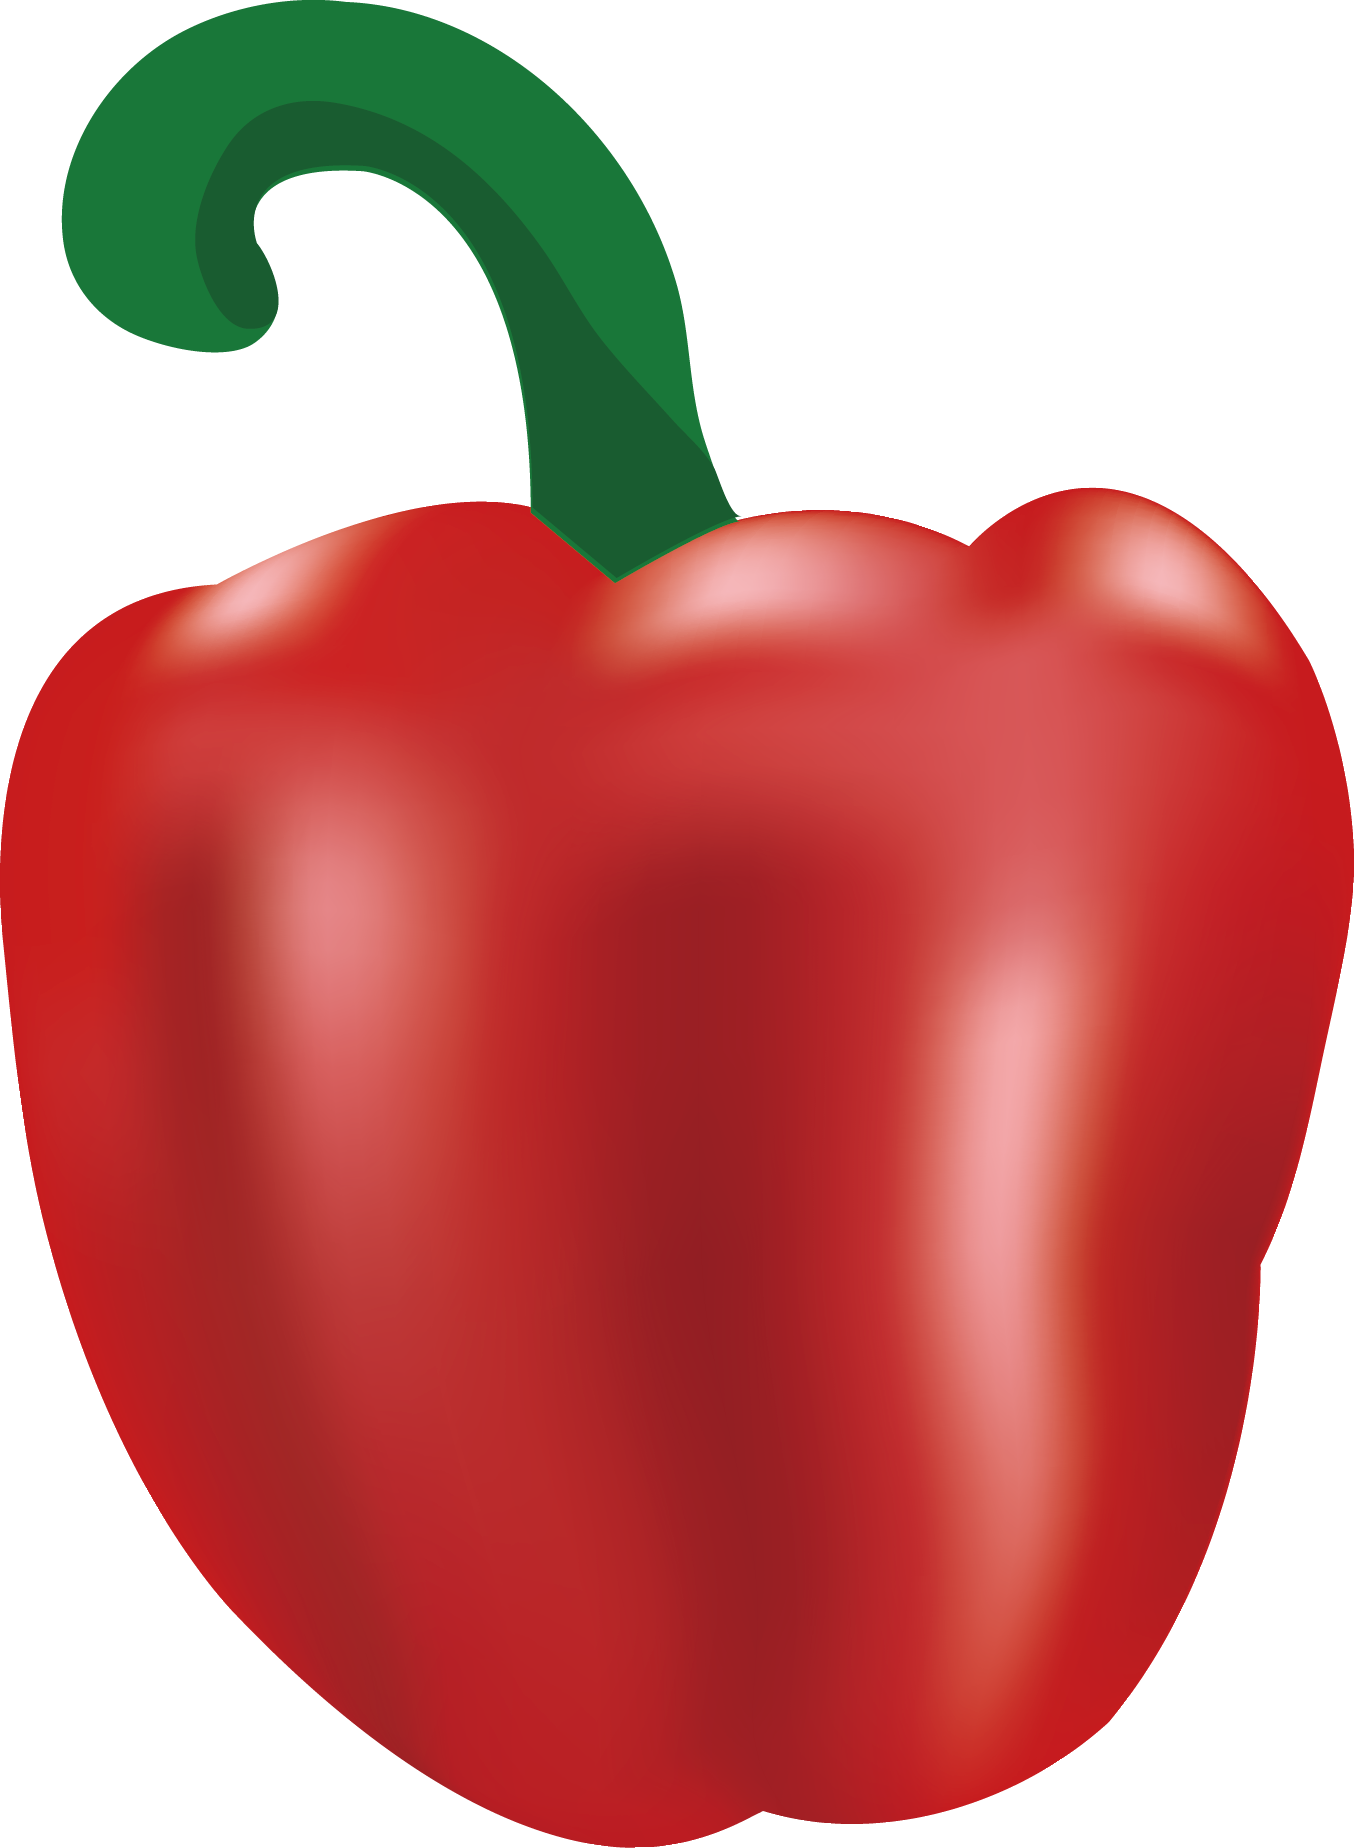 Chili pepper Bell pepper Vegetable - Bell peppers vector png download ...